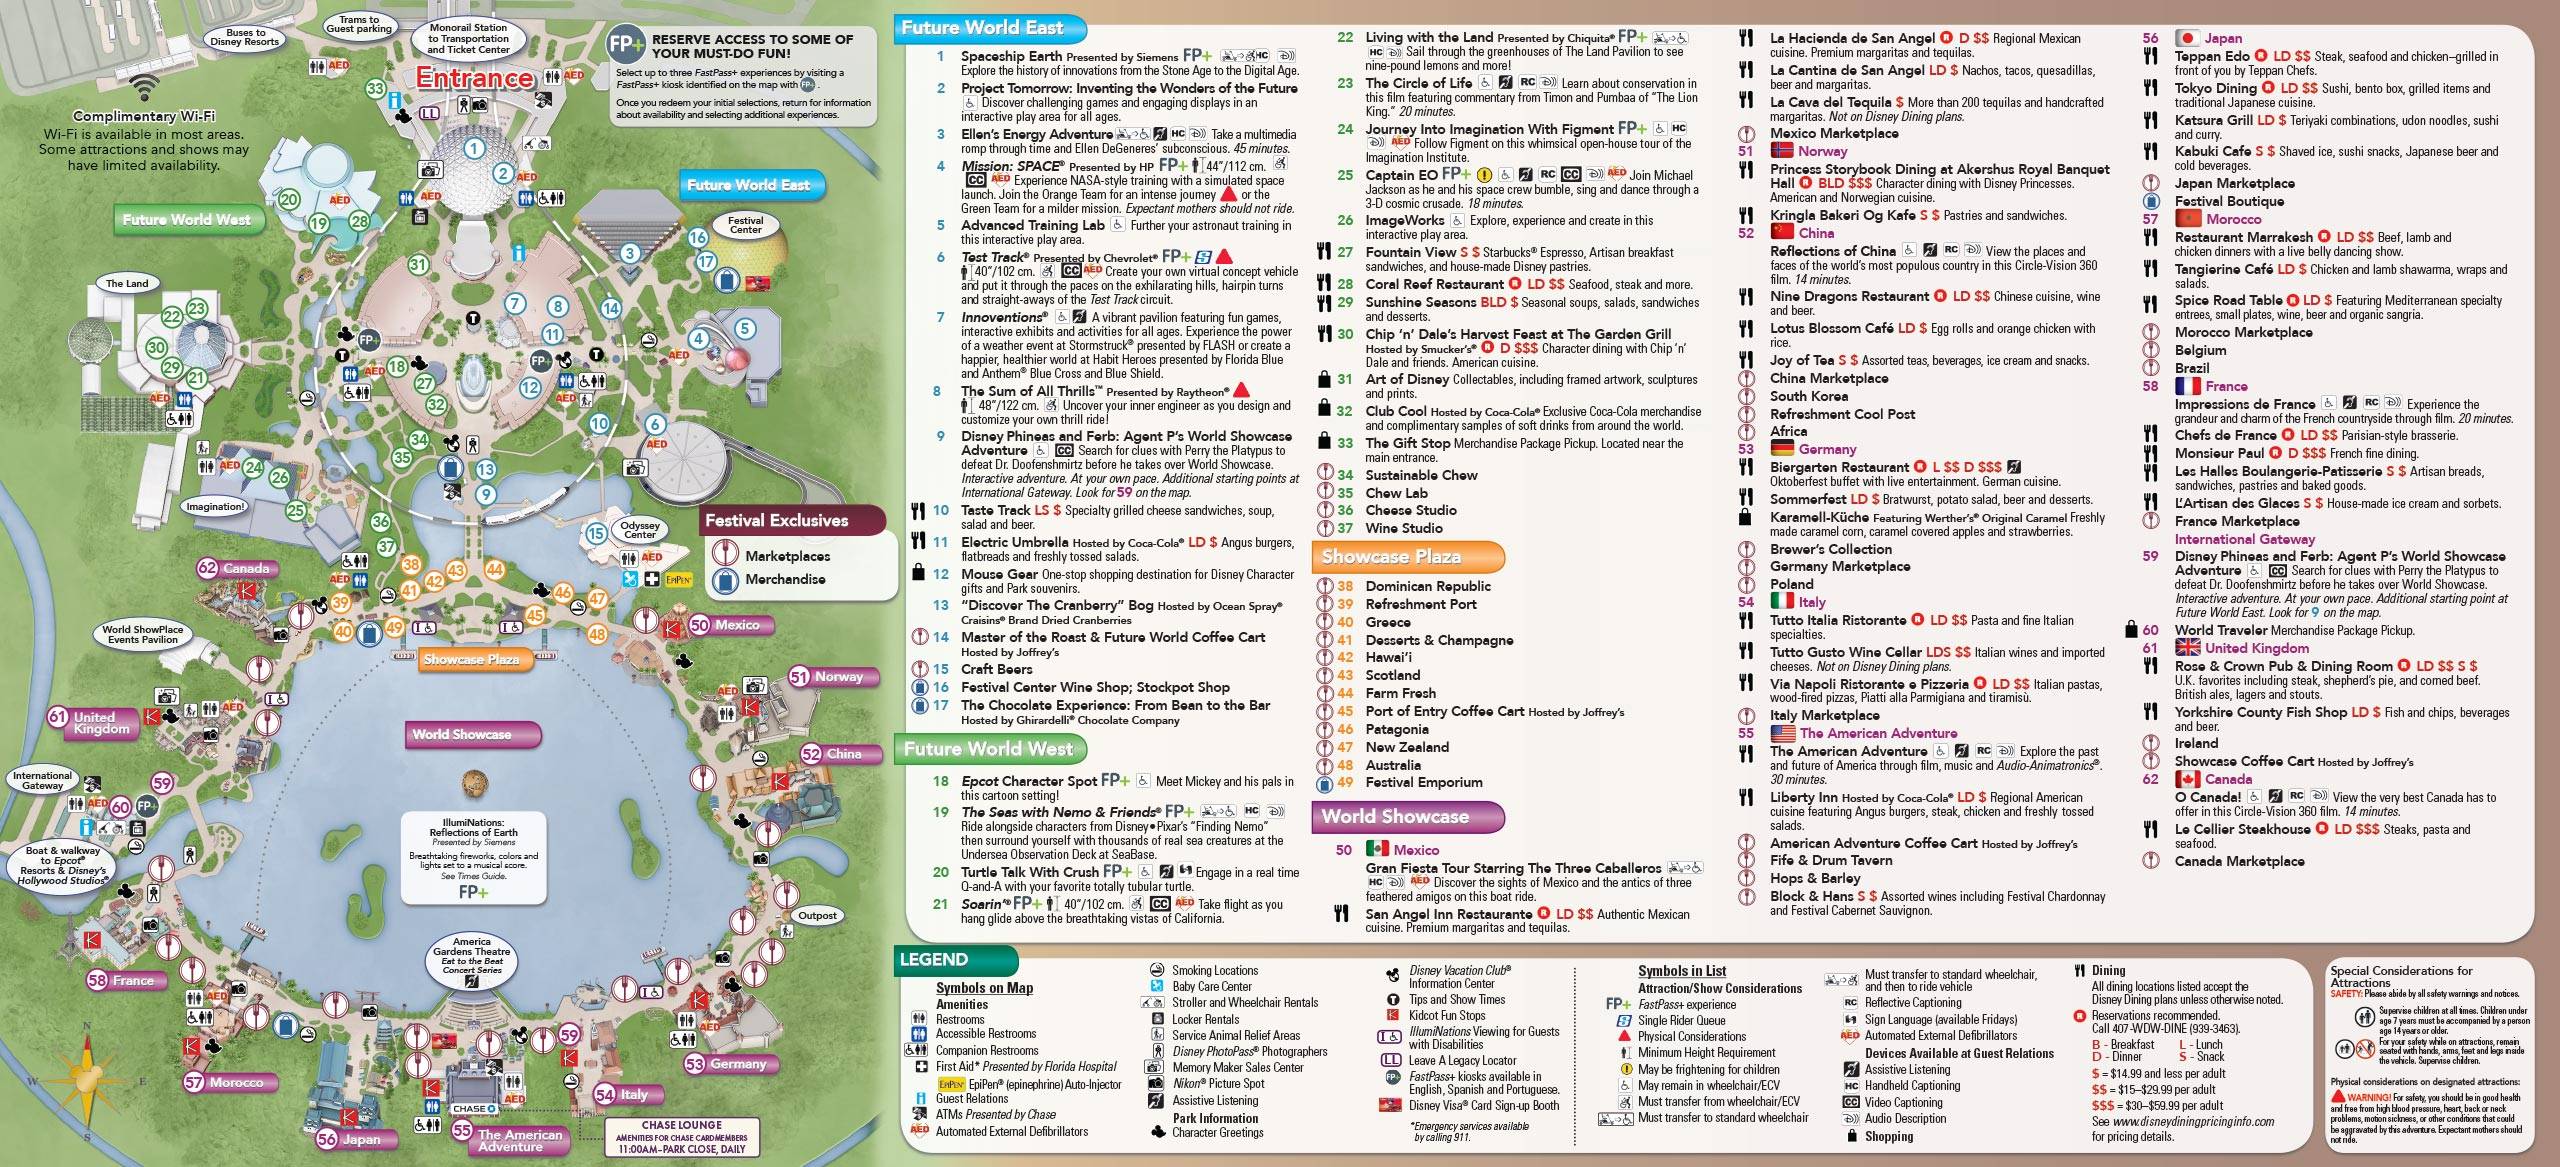 2015 Epcot International Food and Wine Festival Guide Map - Back